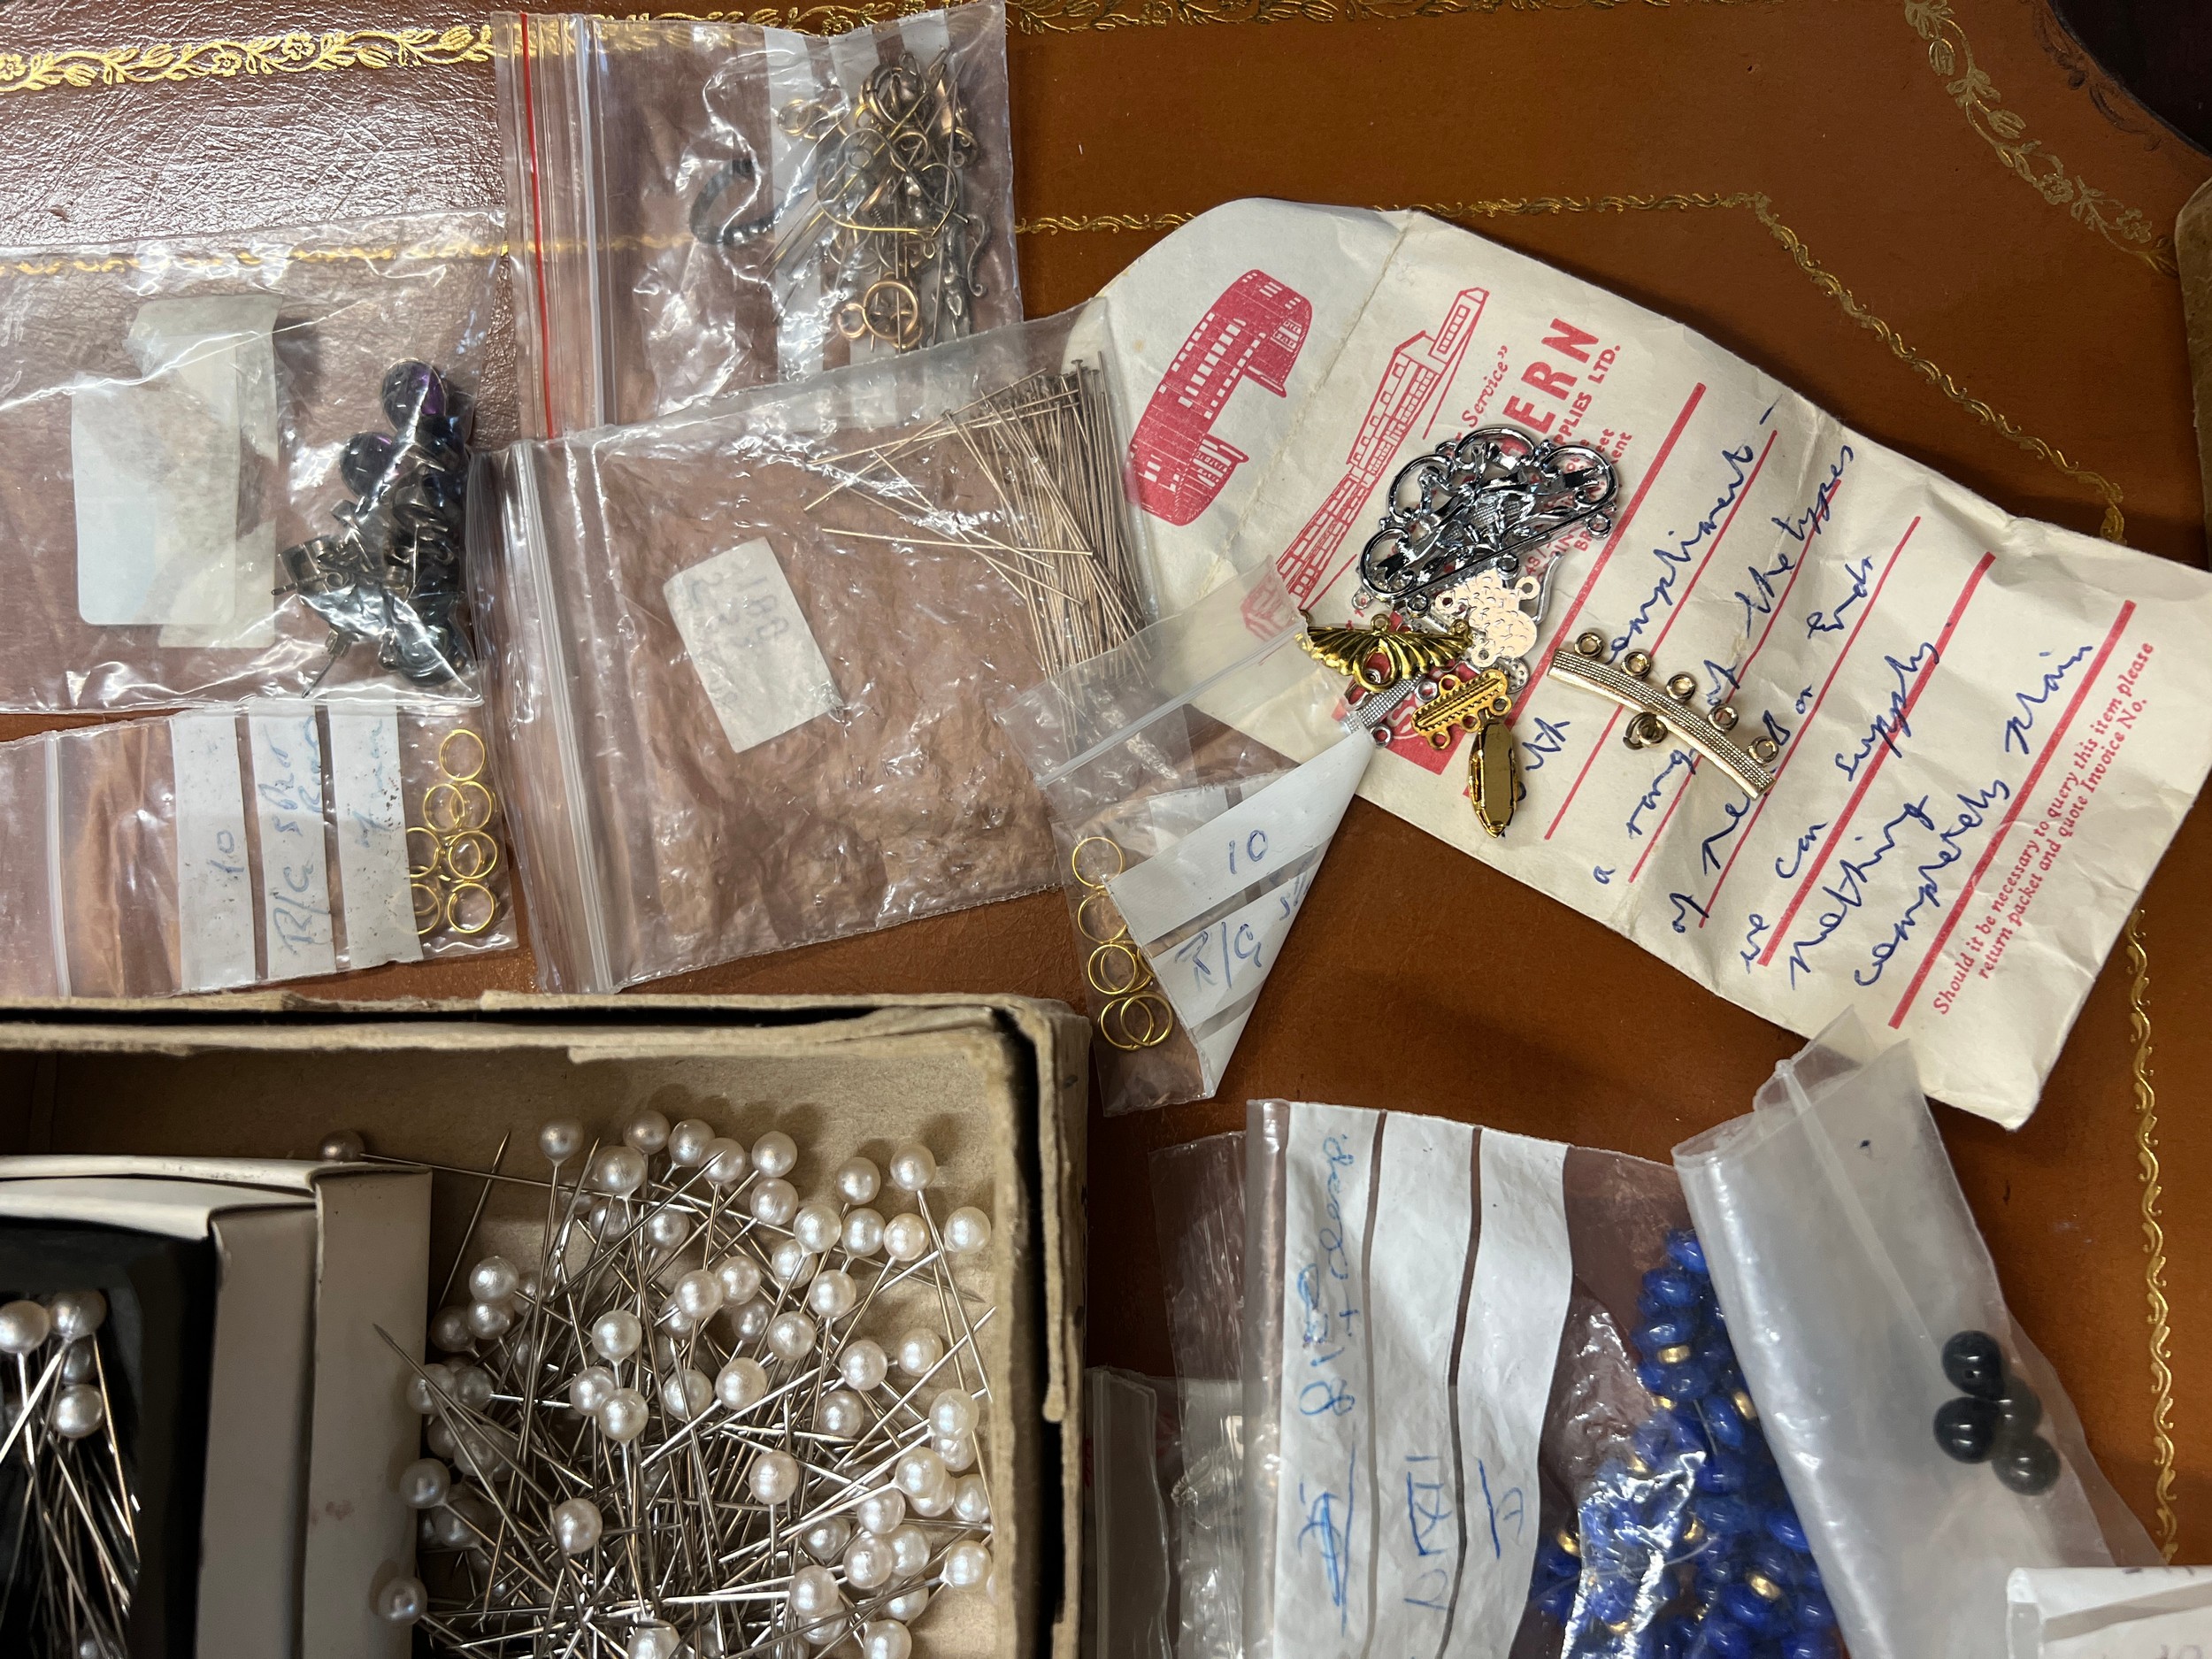 A quantity of jewellery fastenings, loose beads including lapis etc. - Image 5 of 5